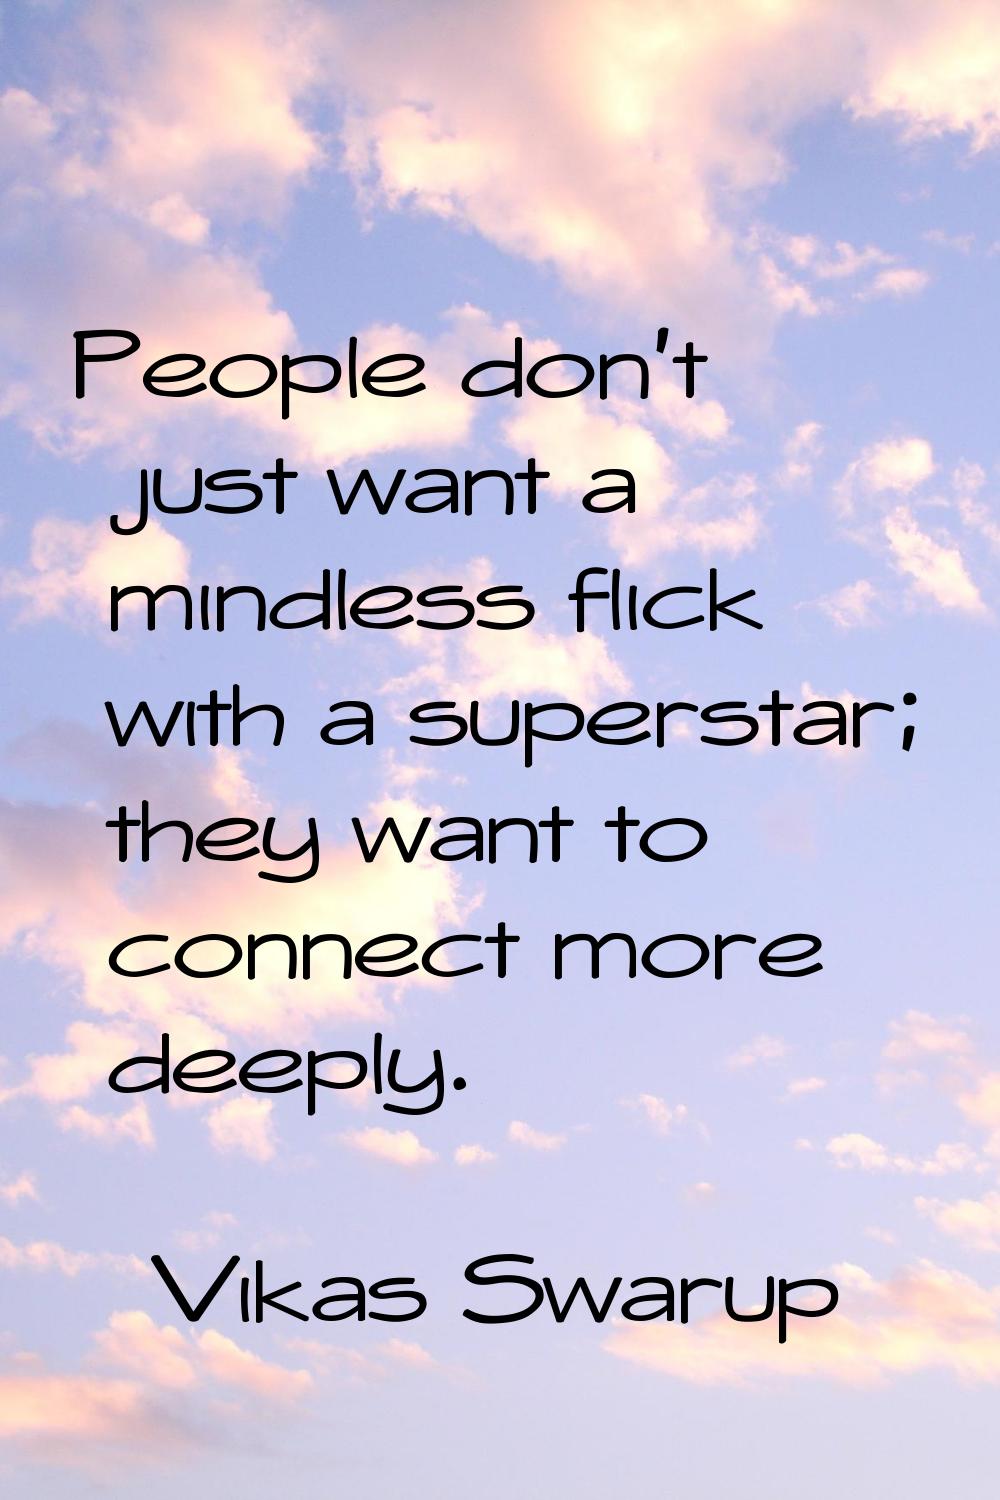 People don't just want a mindless flick with a superstar; they want to connect more deeply.